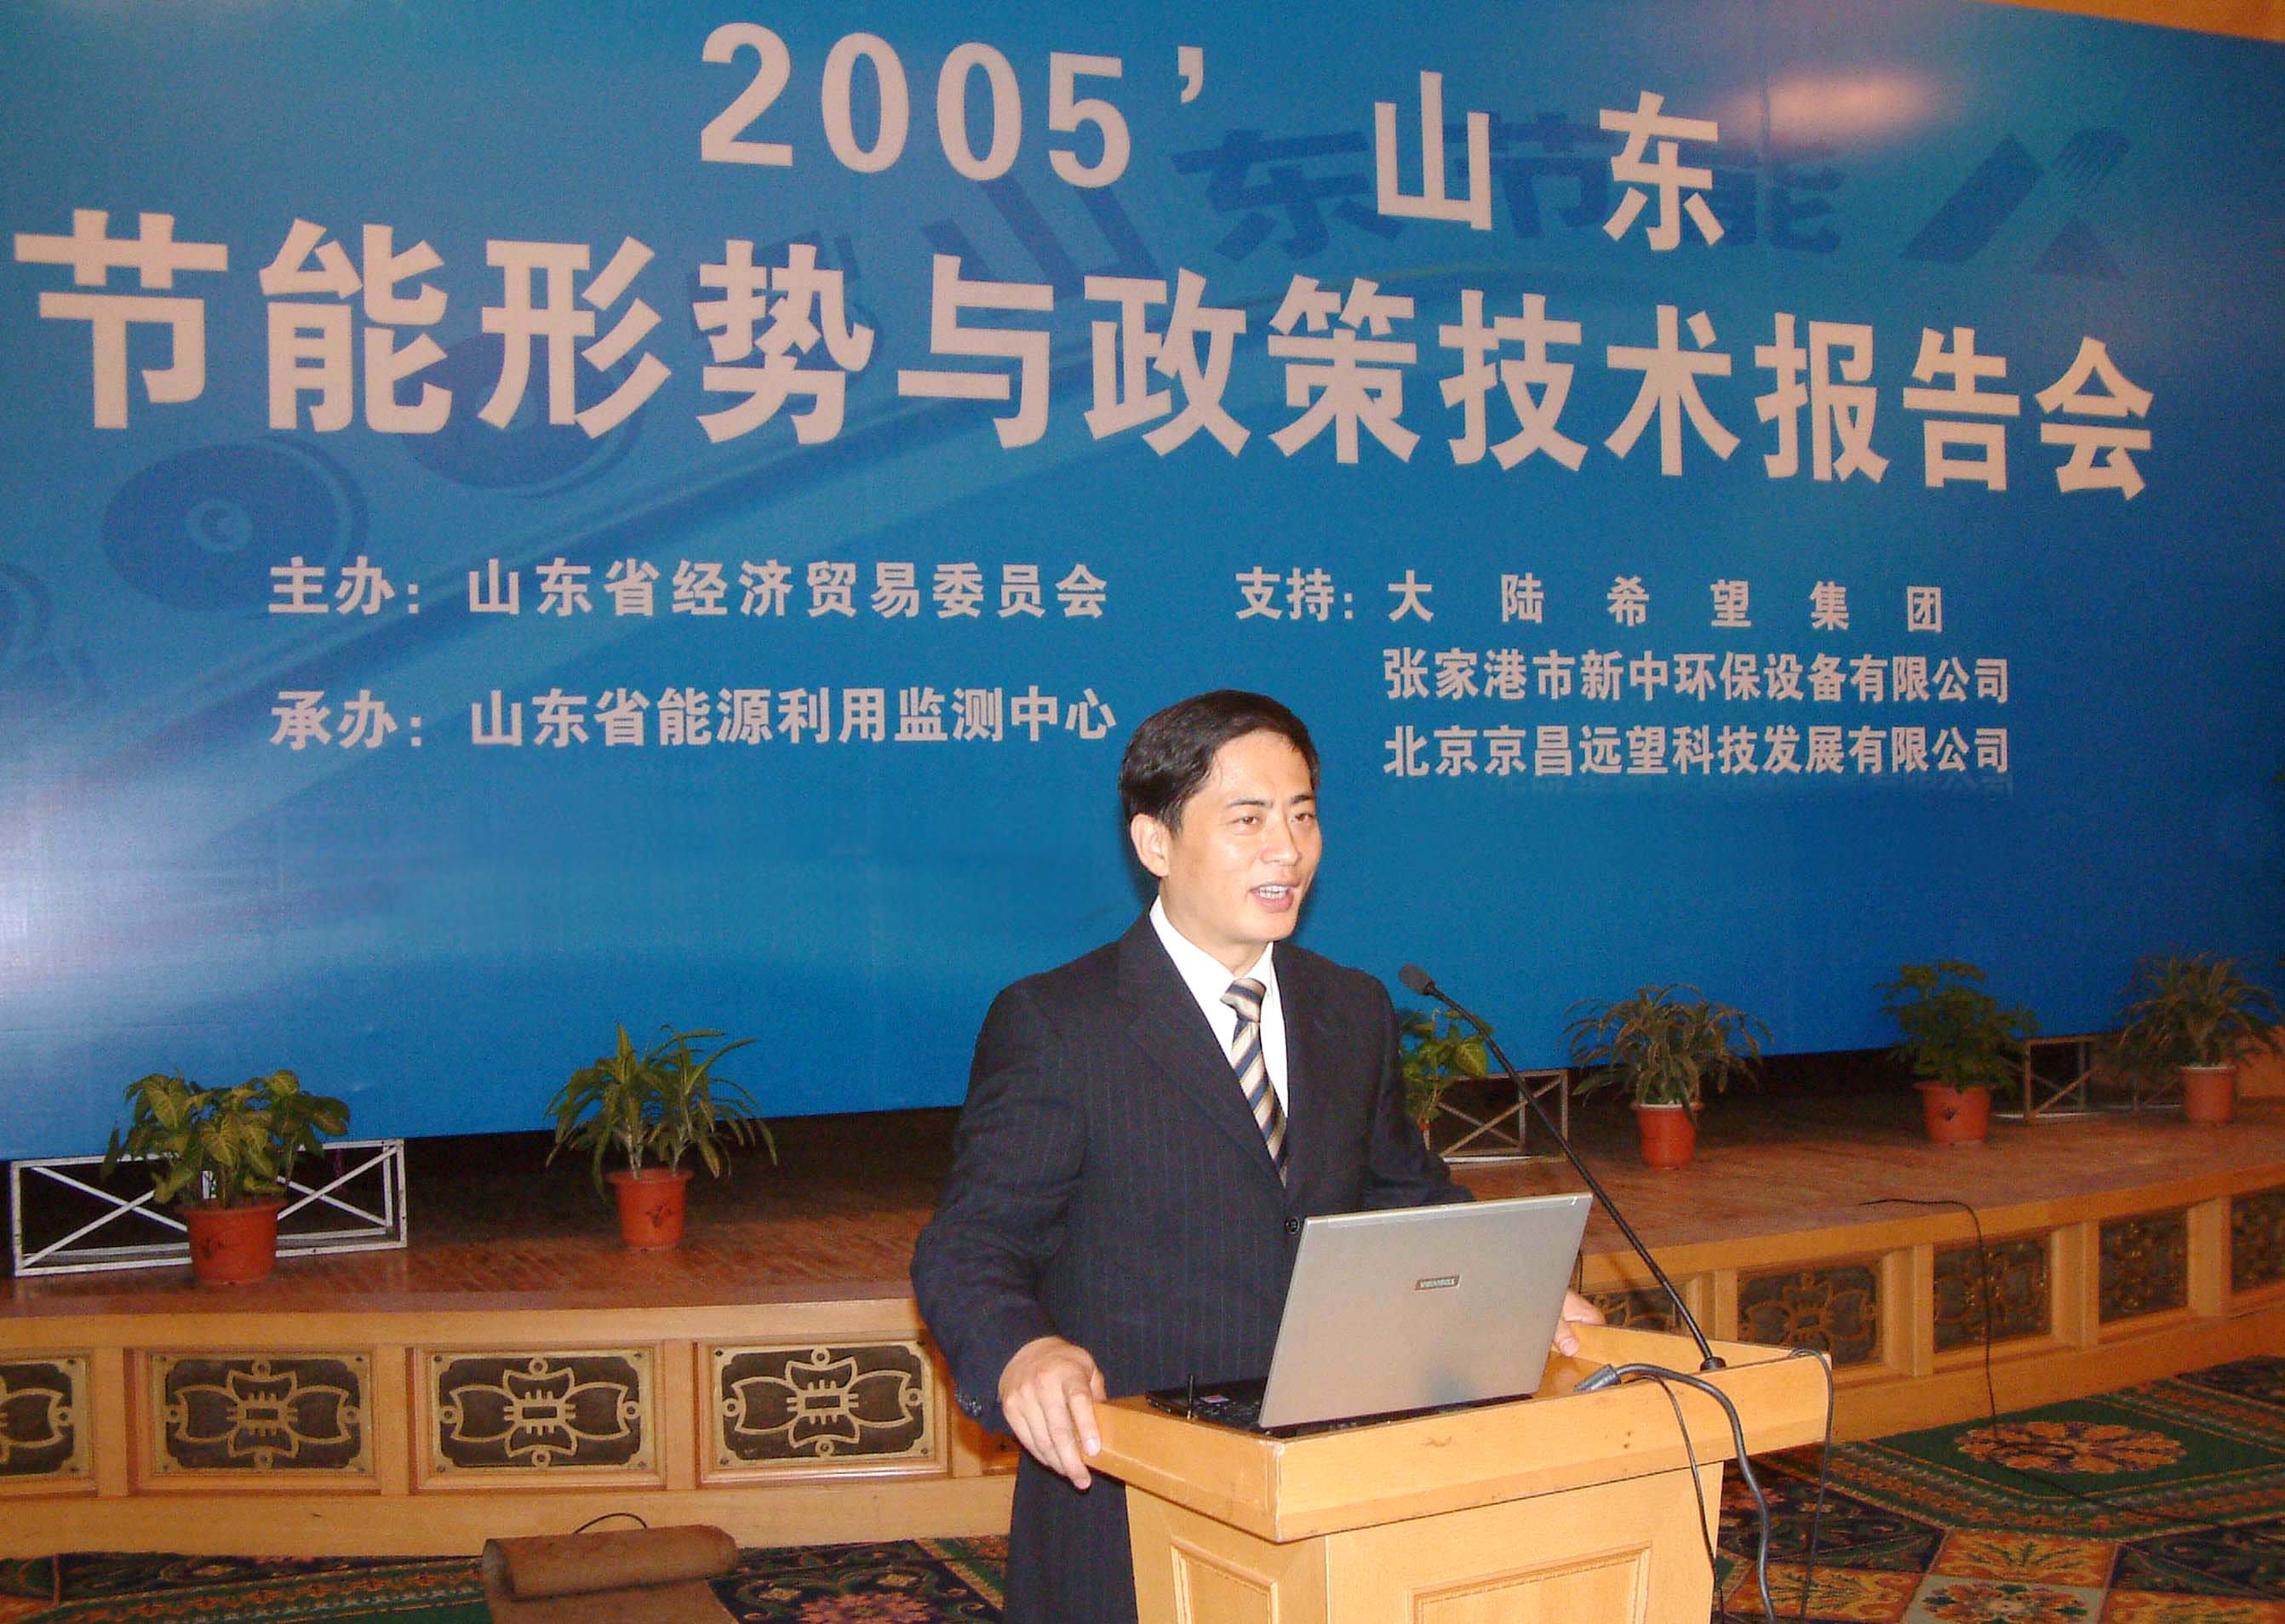 In 2005, President Bin giving a technical report in Shandong province